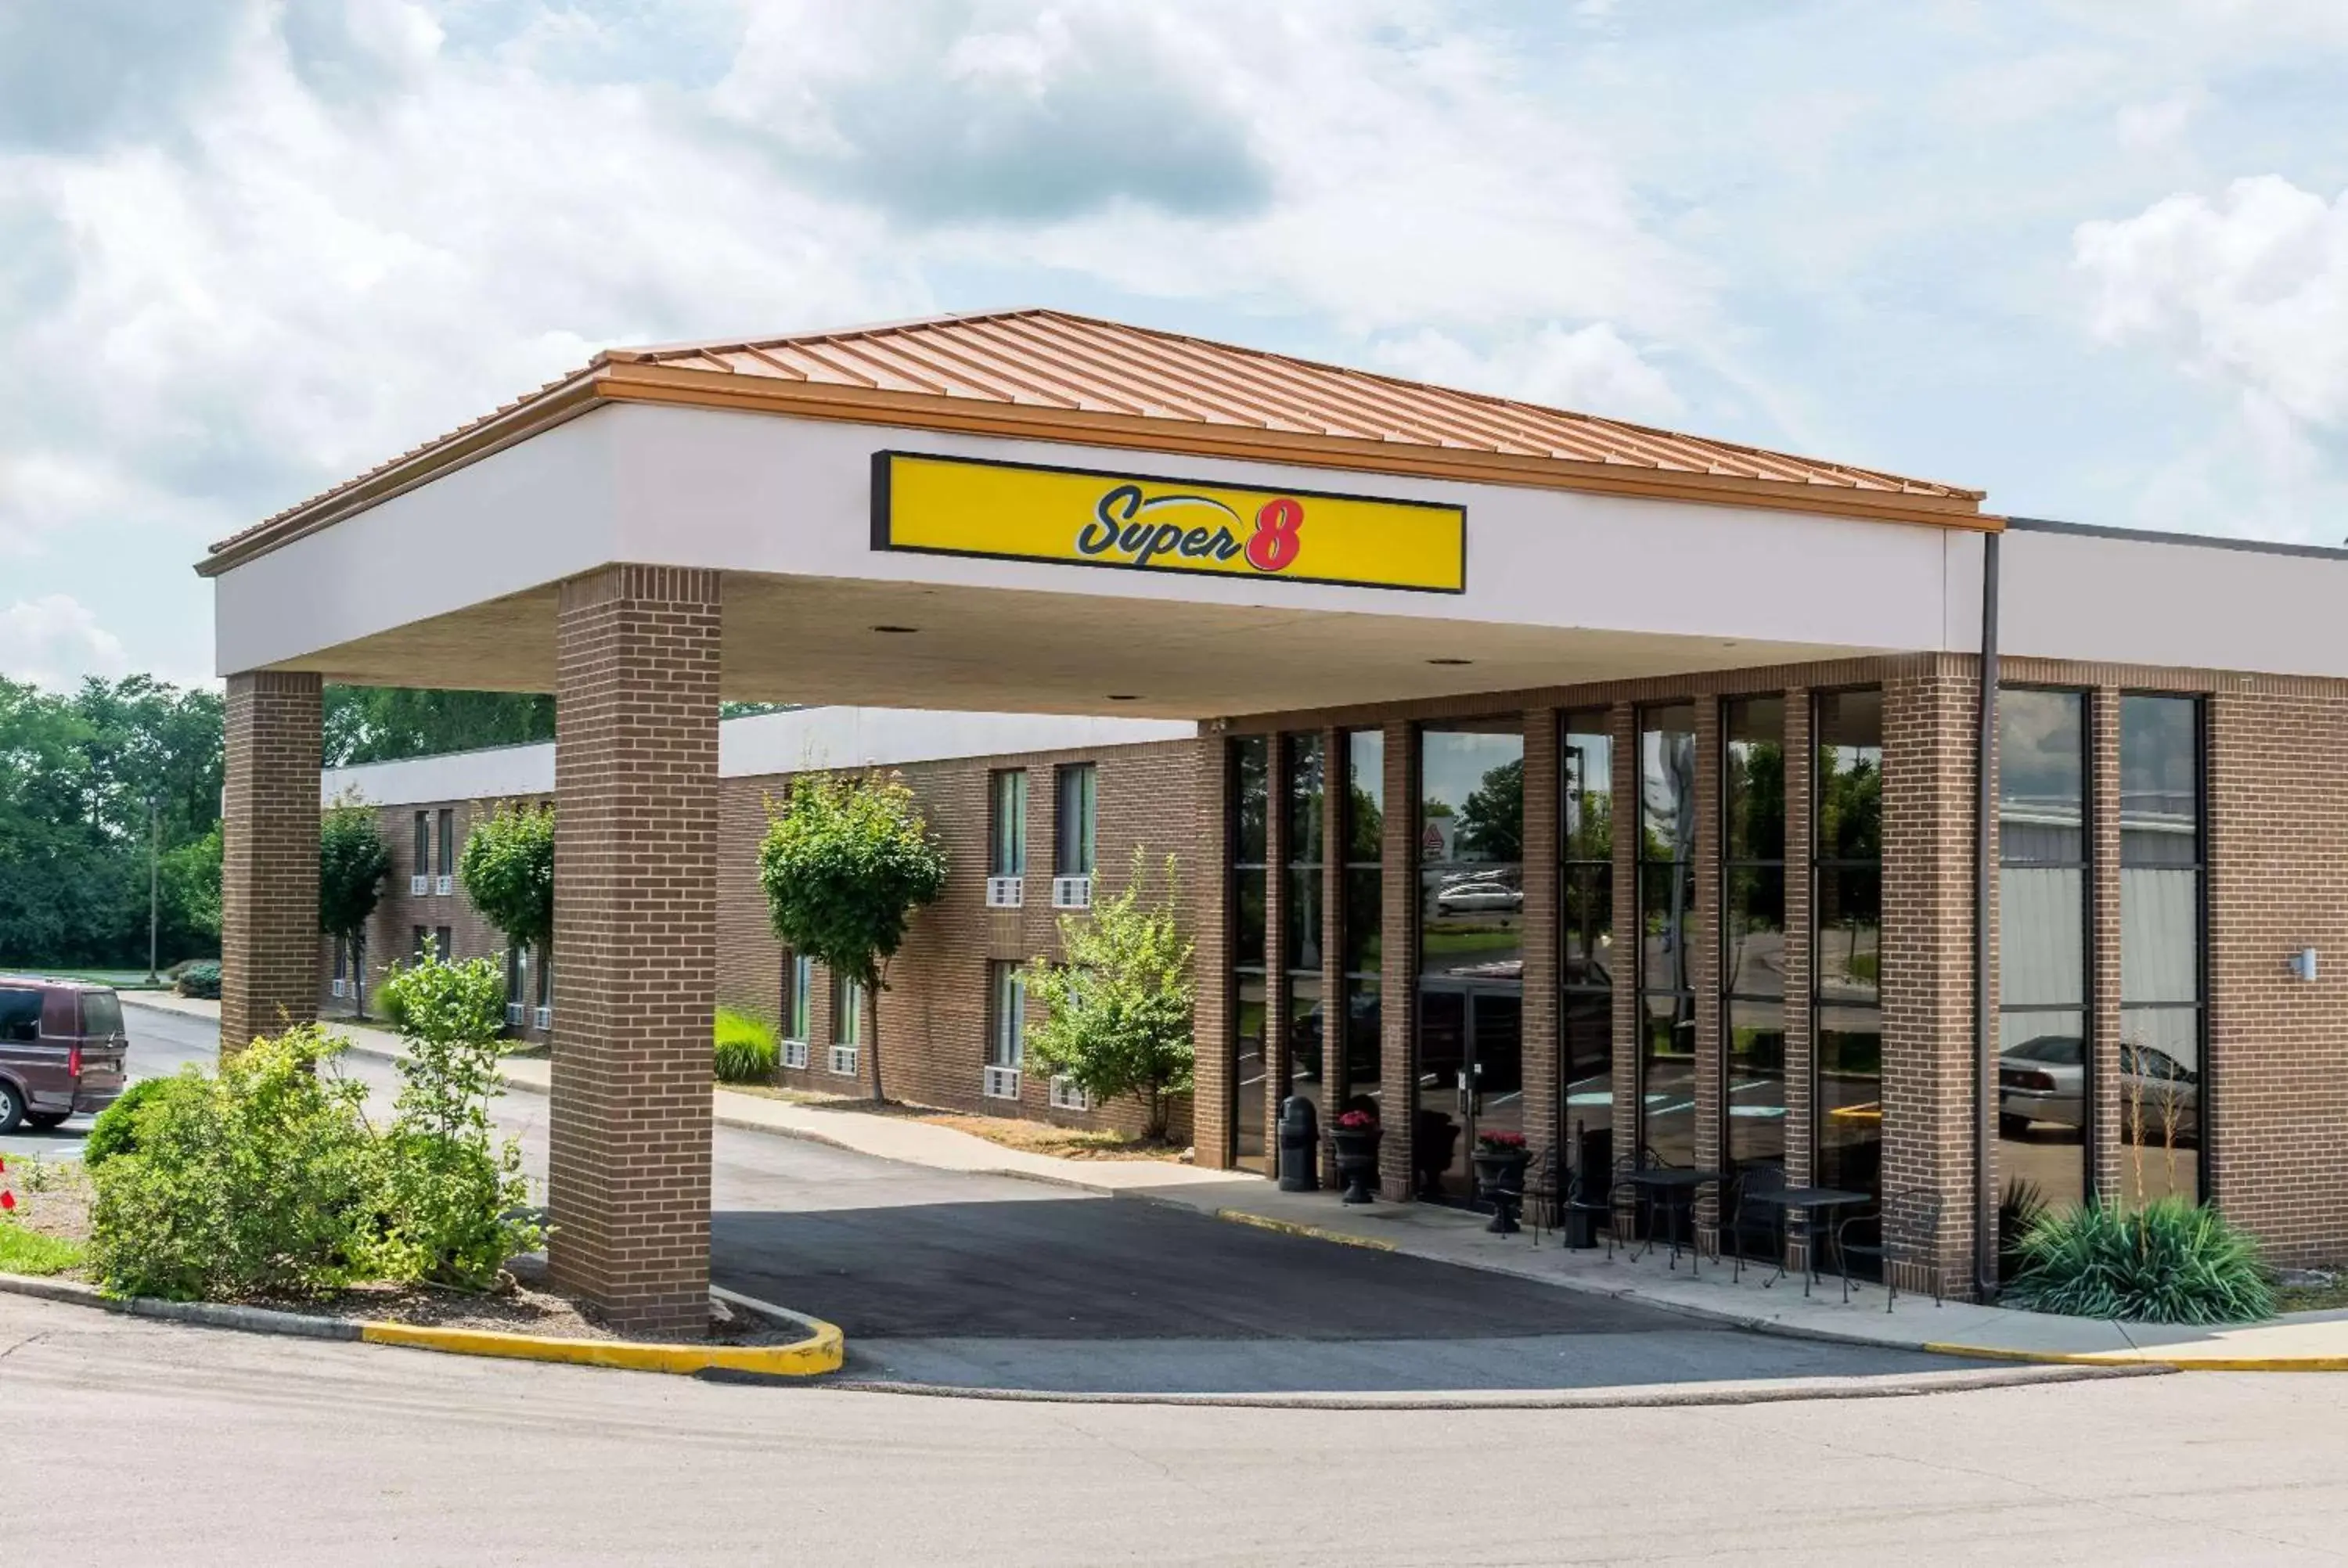 Property building in Super 8 by Wyndham Miamisburg Dayton S Area OH